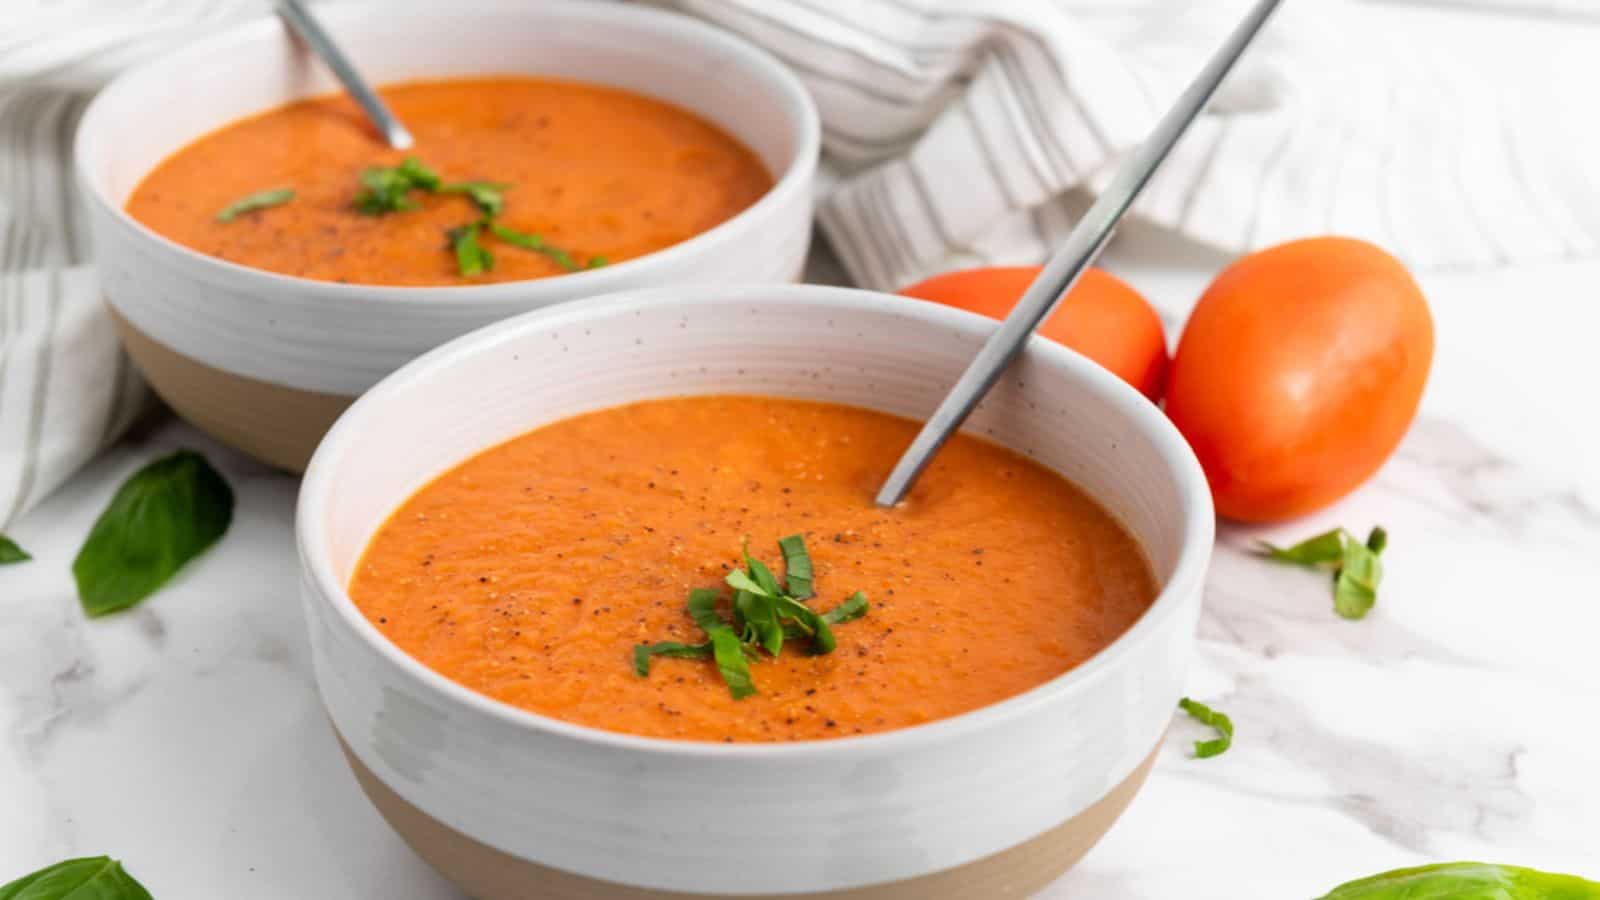 Two bowls of tomato soup with basil and tomatoes.